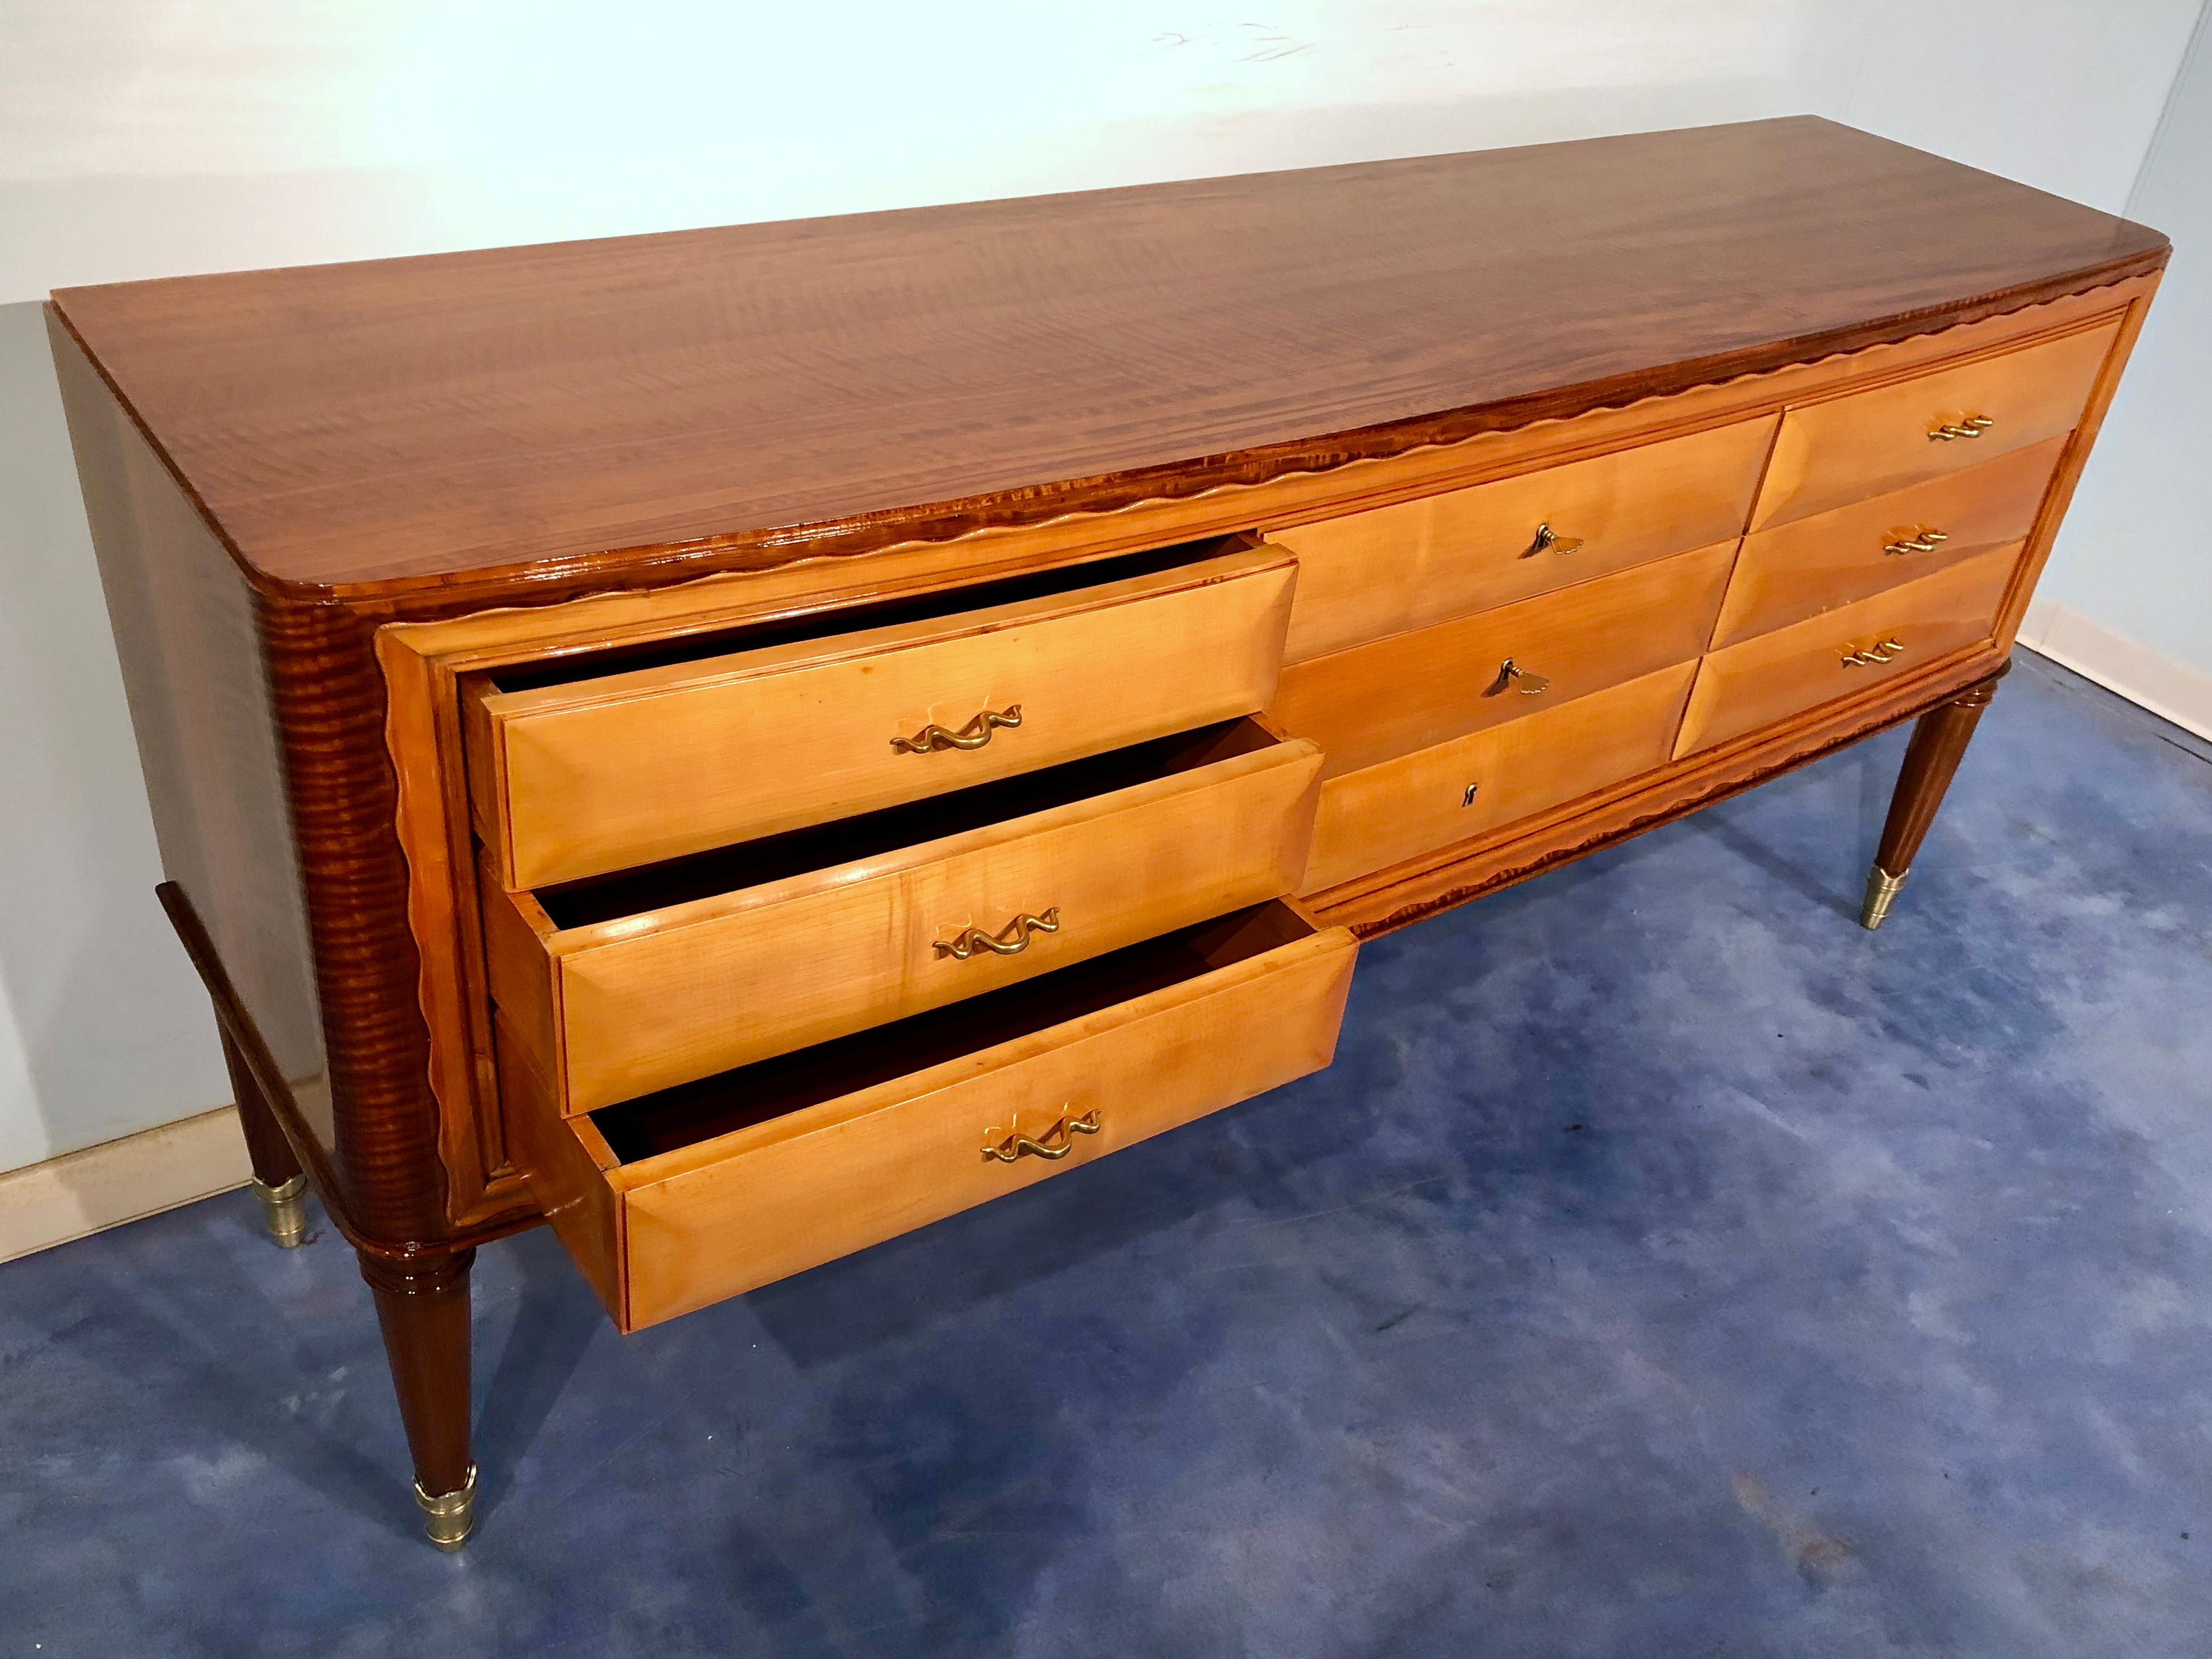 Italian Midcentury Sideboard or Chest of Drawers by Paolo Buffa, 1950s For Sale 4